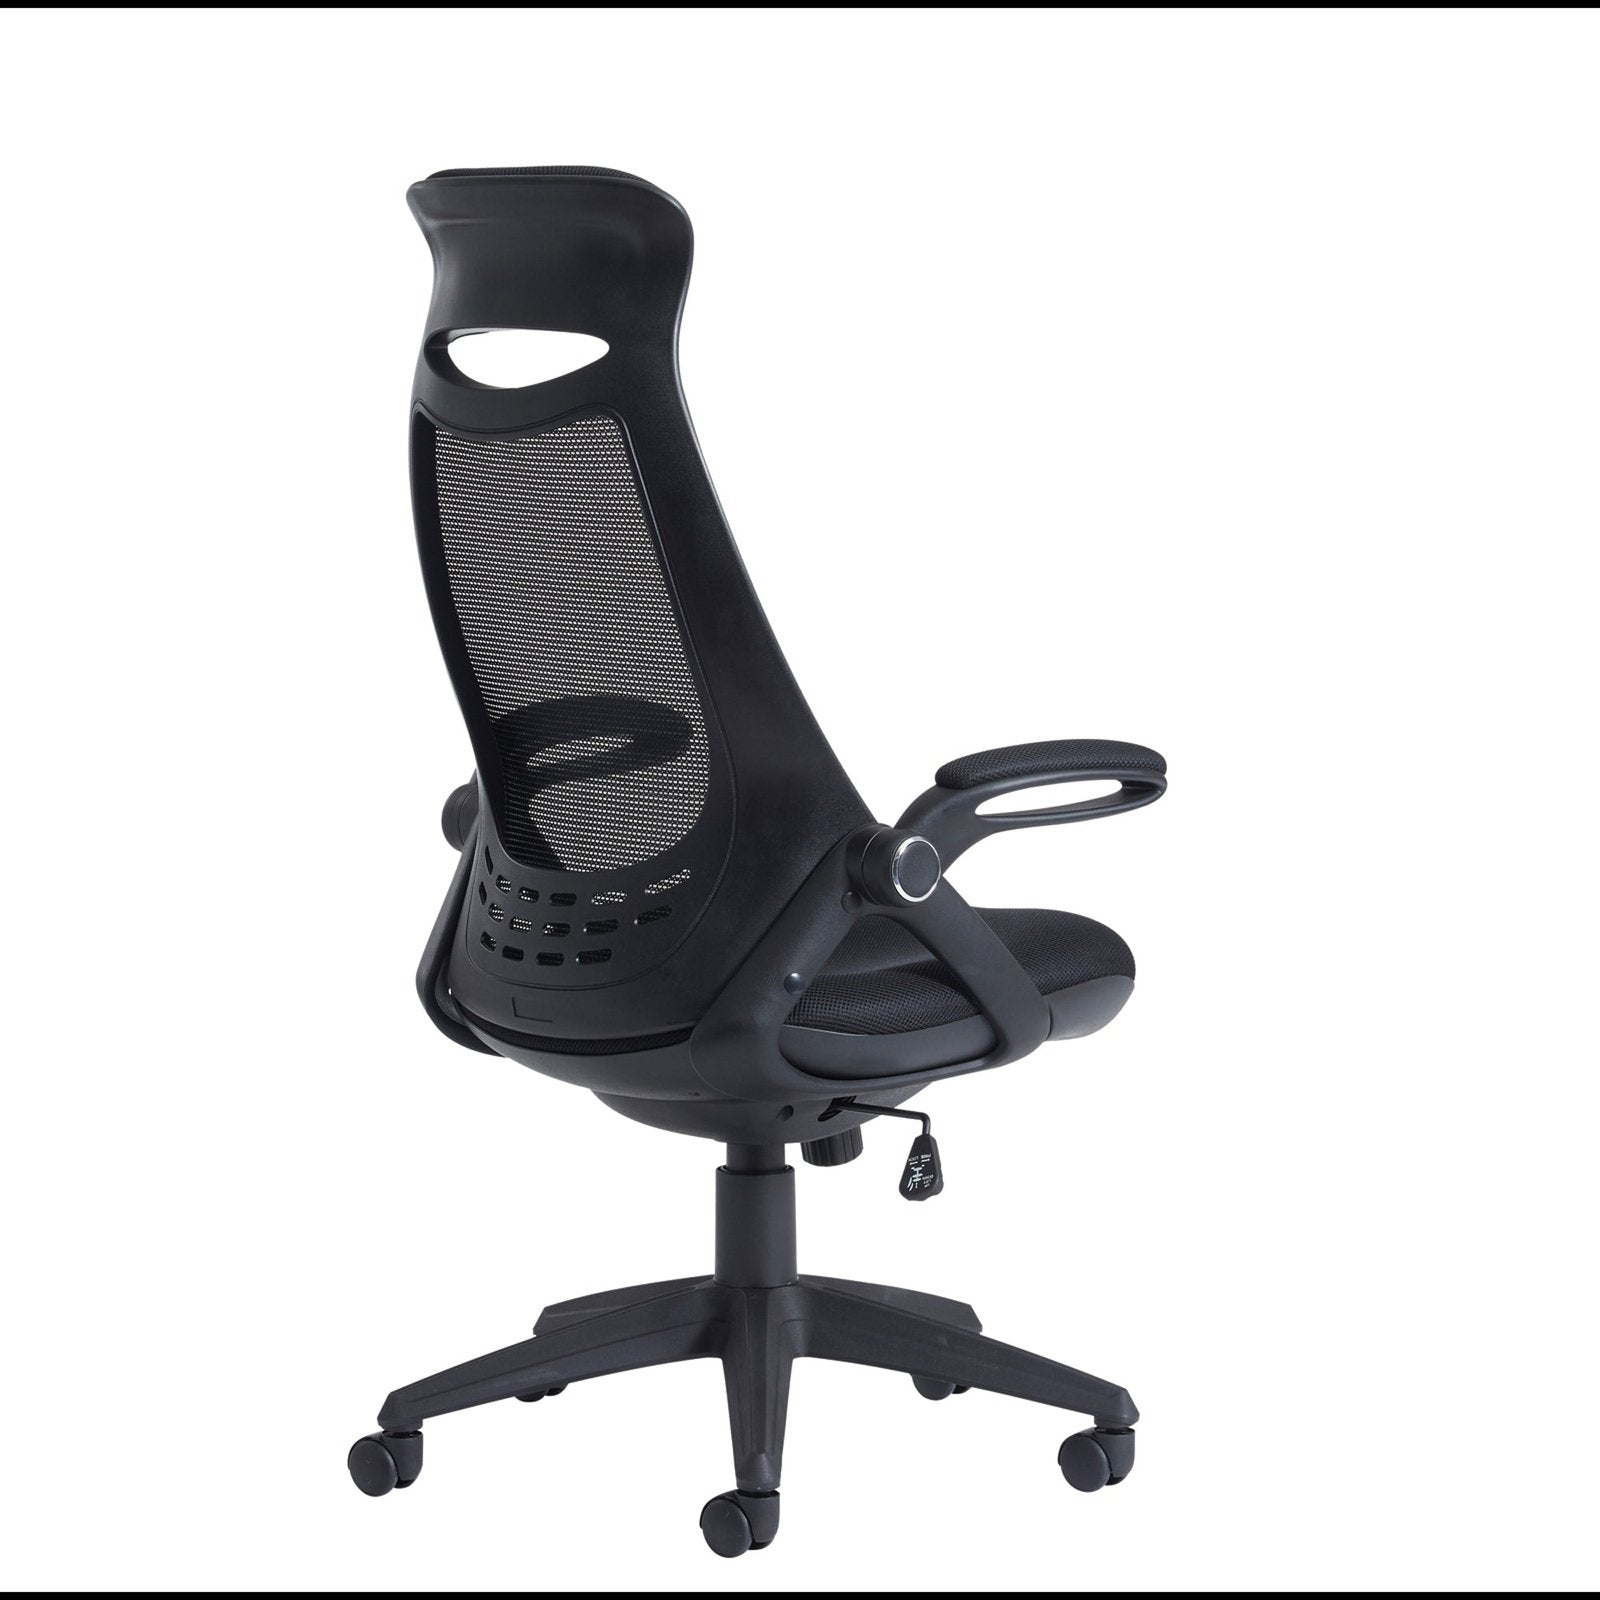 Tuscan mesh high back chair with head support - black - Office Products Online